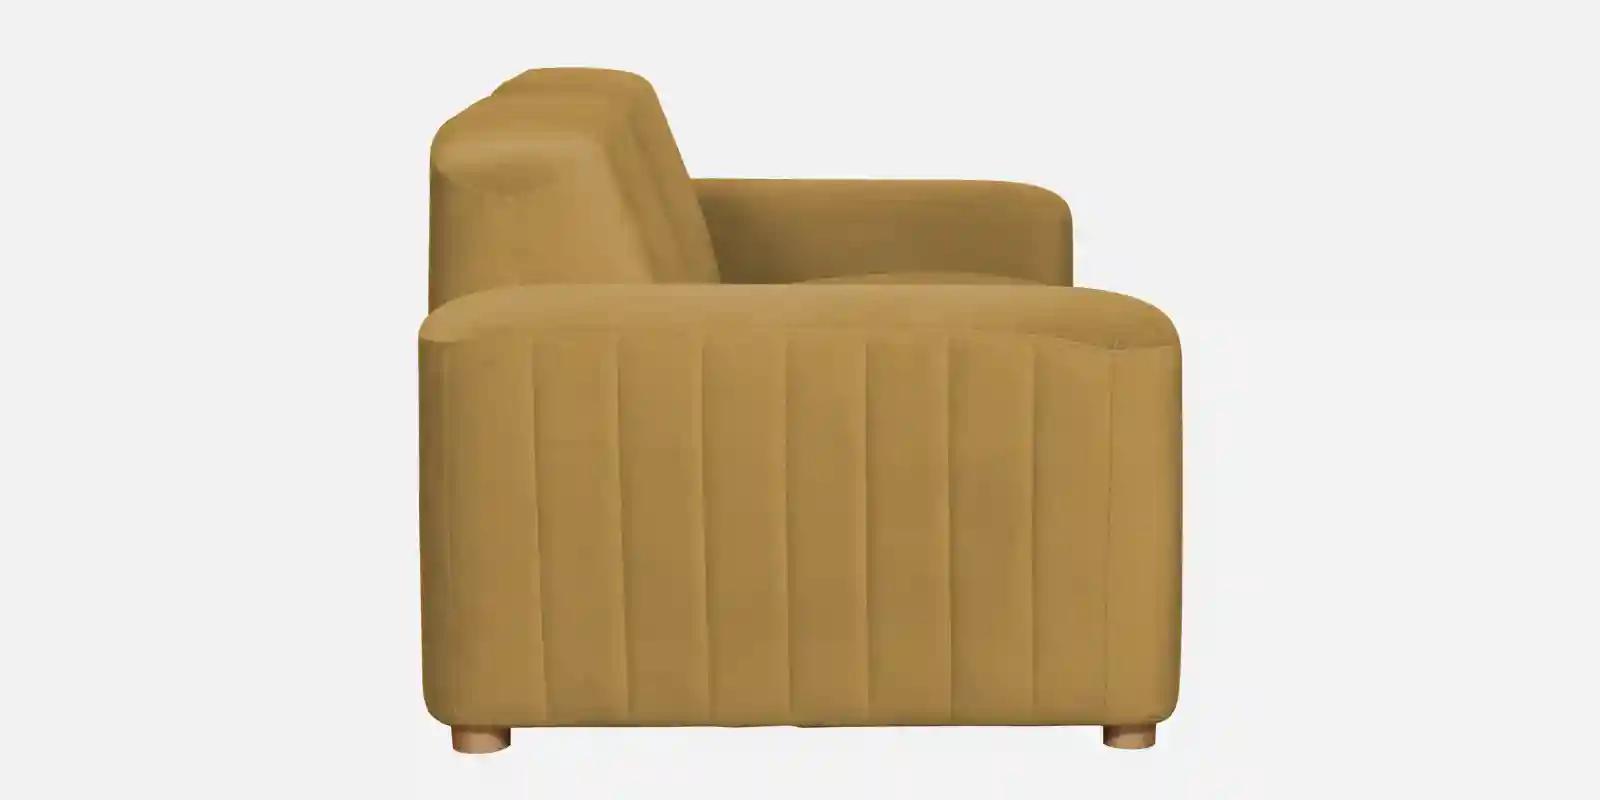 Pine Wood Polyester Fabric Beige - 2 Seater